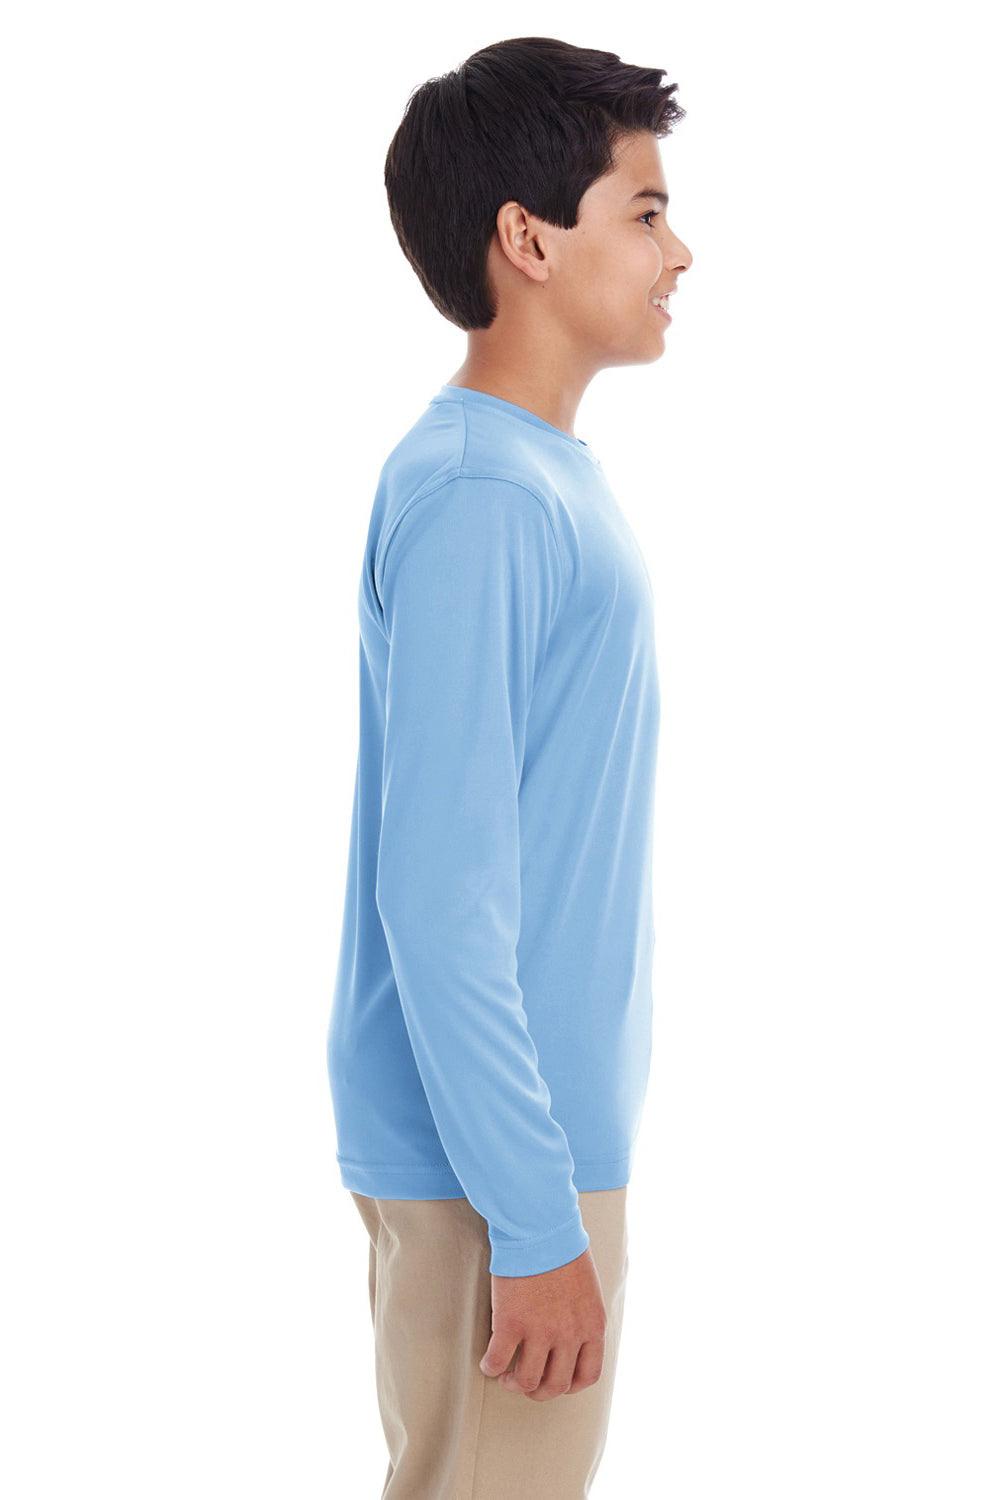 UltraClub 8622Y Youth Cool & Dry Performance Moisture Wicking Long Sleeve Crewneck T-Shirt Columbia Blue Side